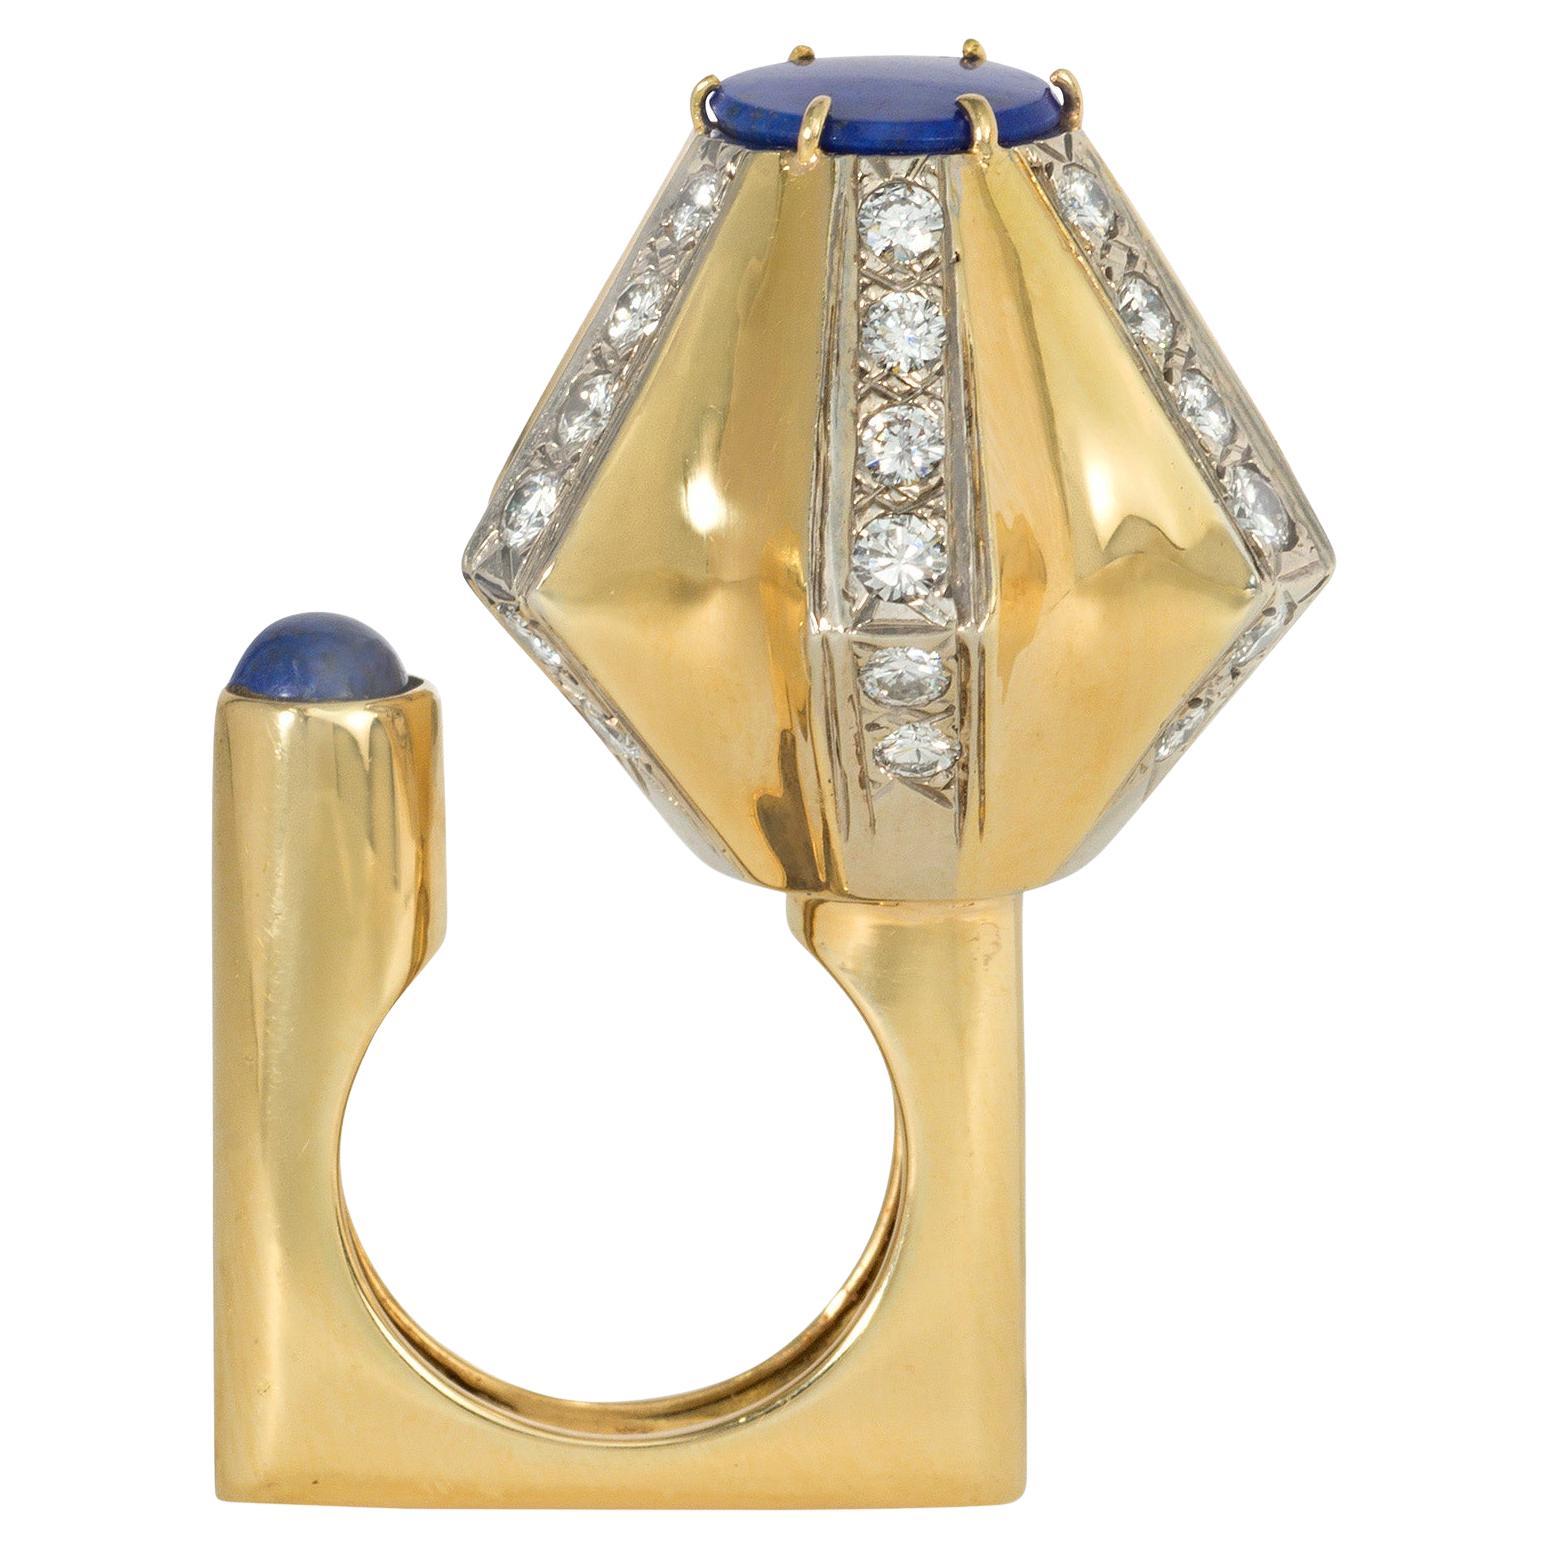 Dinh Van for Cartier 1970s Lapis, Diamond, and Gold Ring of Geometric Design